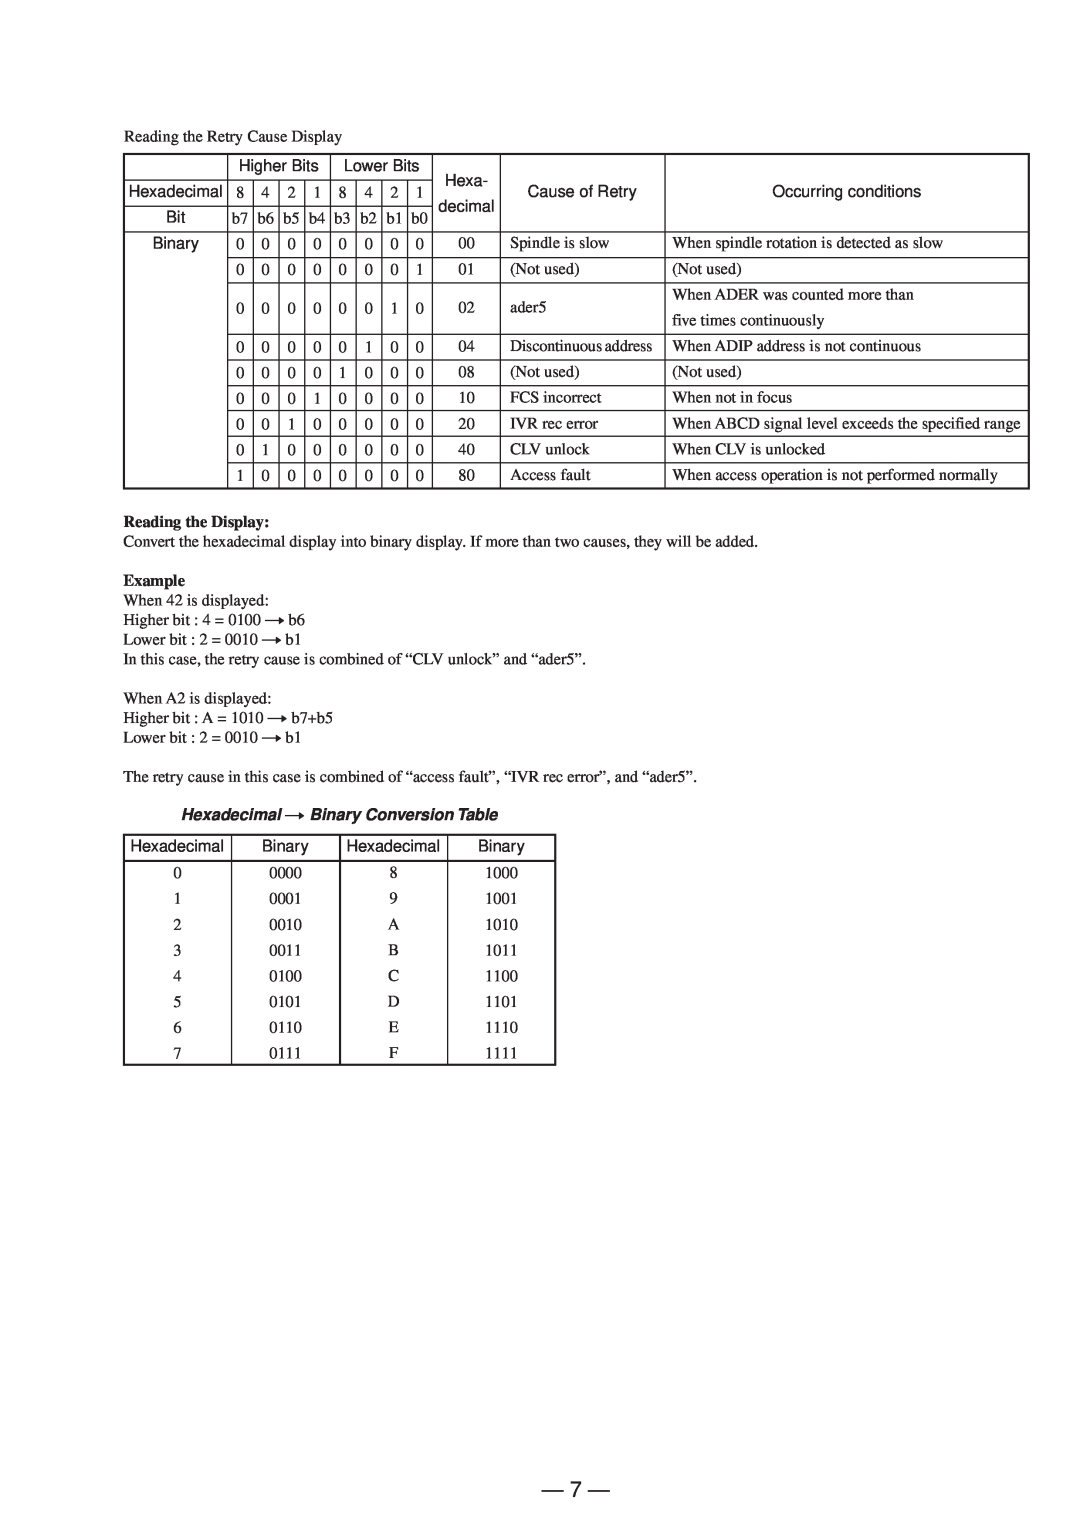 Sony MDS-JD320 service manual Reading the Display, Example, Hexadecimal nBinary Conversion Table 